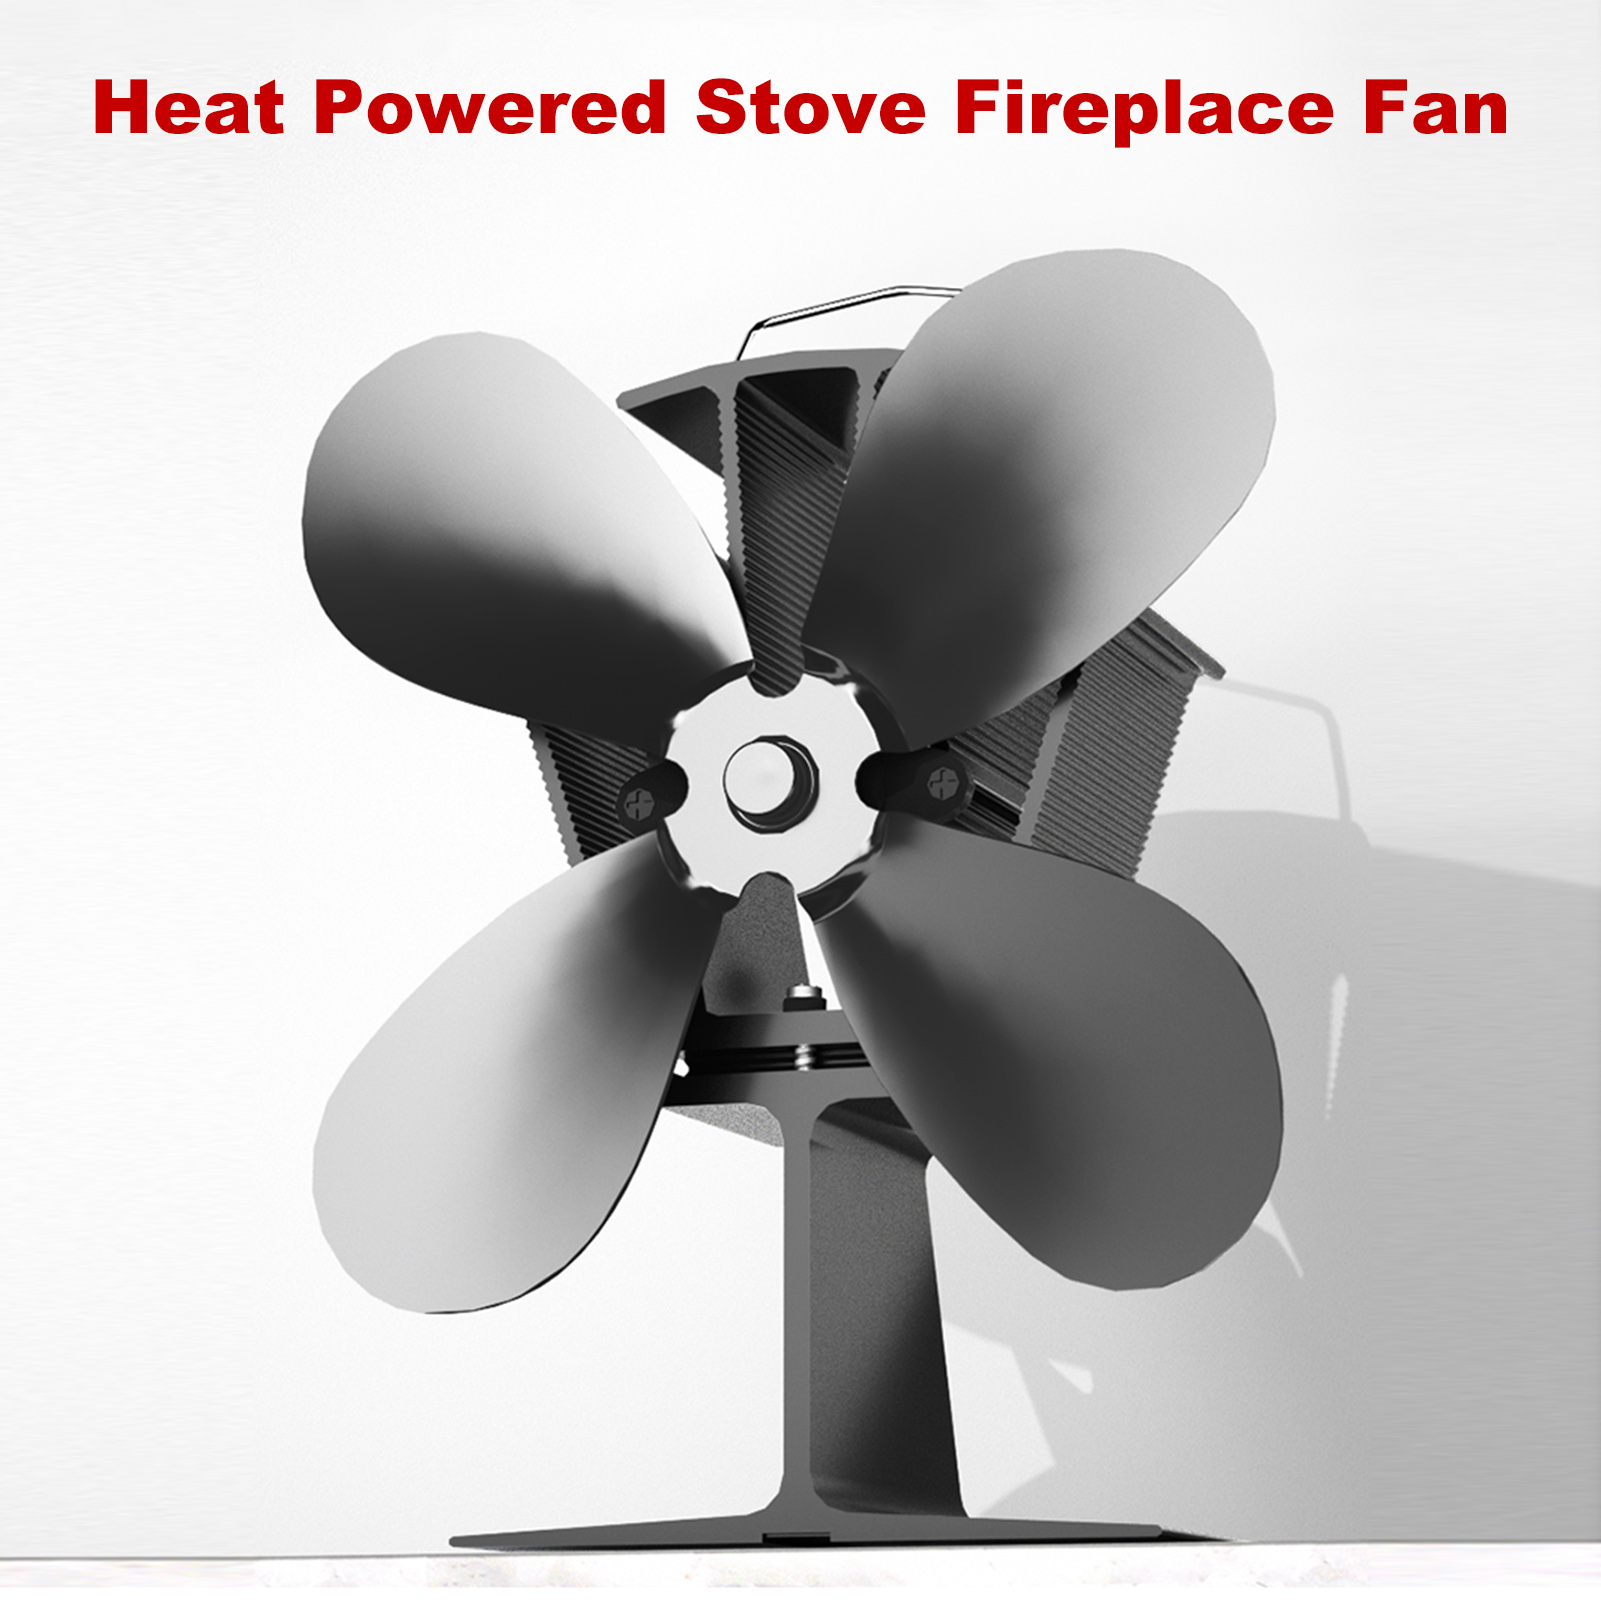 Heat Powered Stove Fan 122°F Start 4 Blades for Home Wood Log Burning Fireplace Circulating Warm Necessary Fireplace Accessories